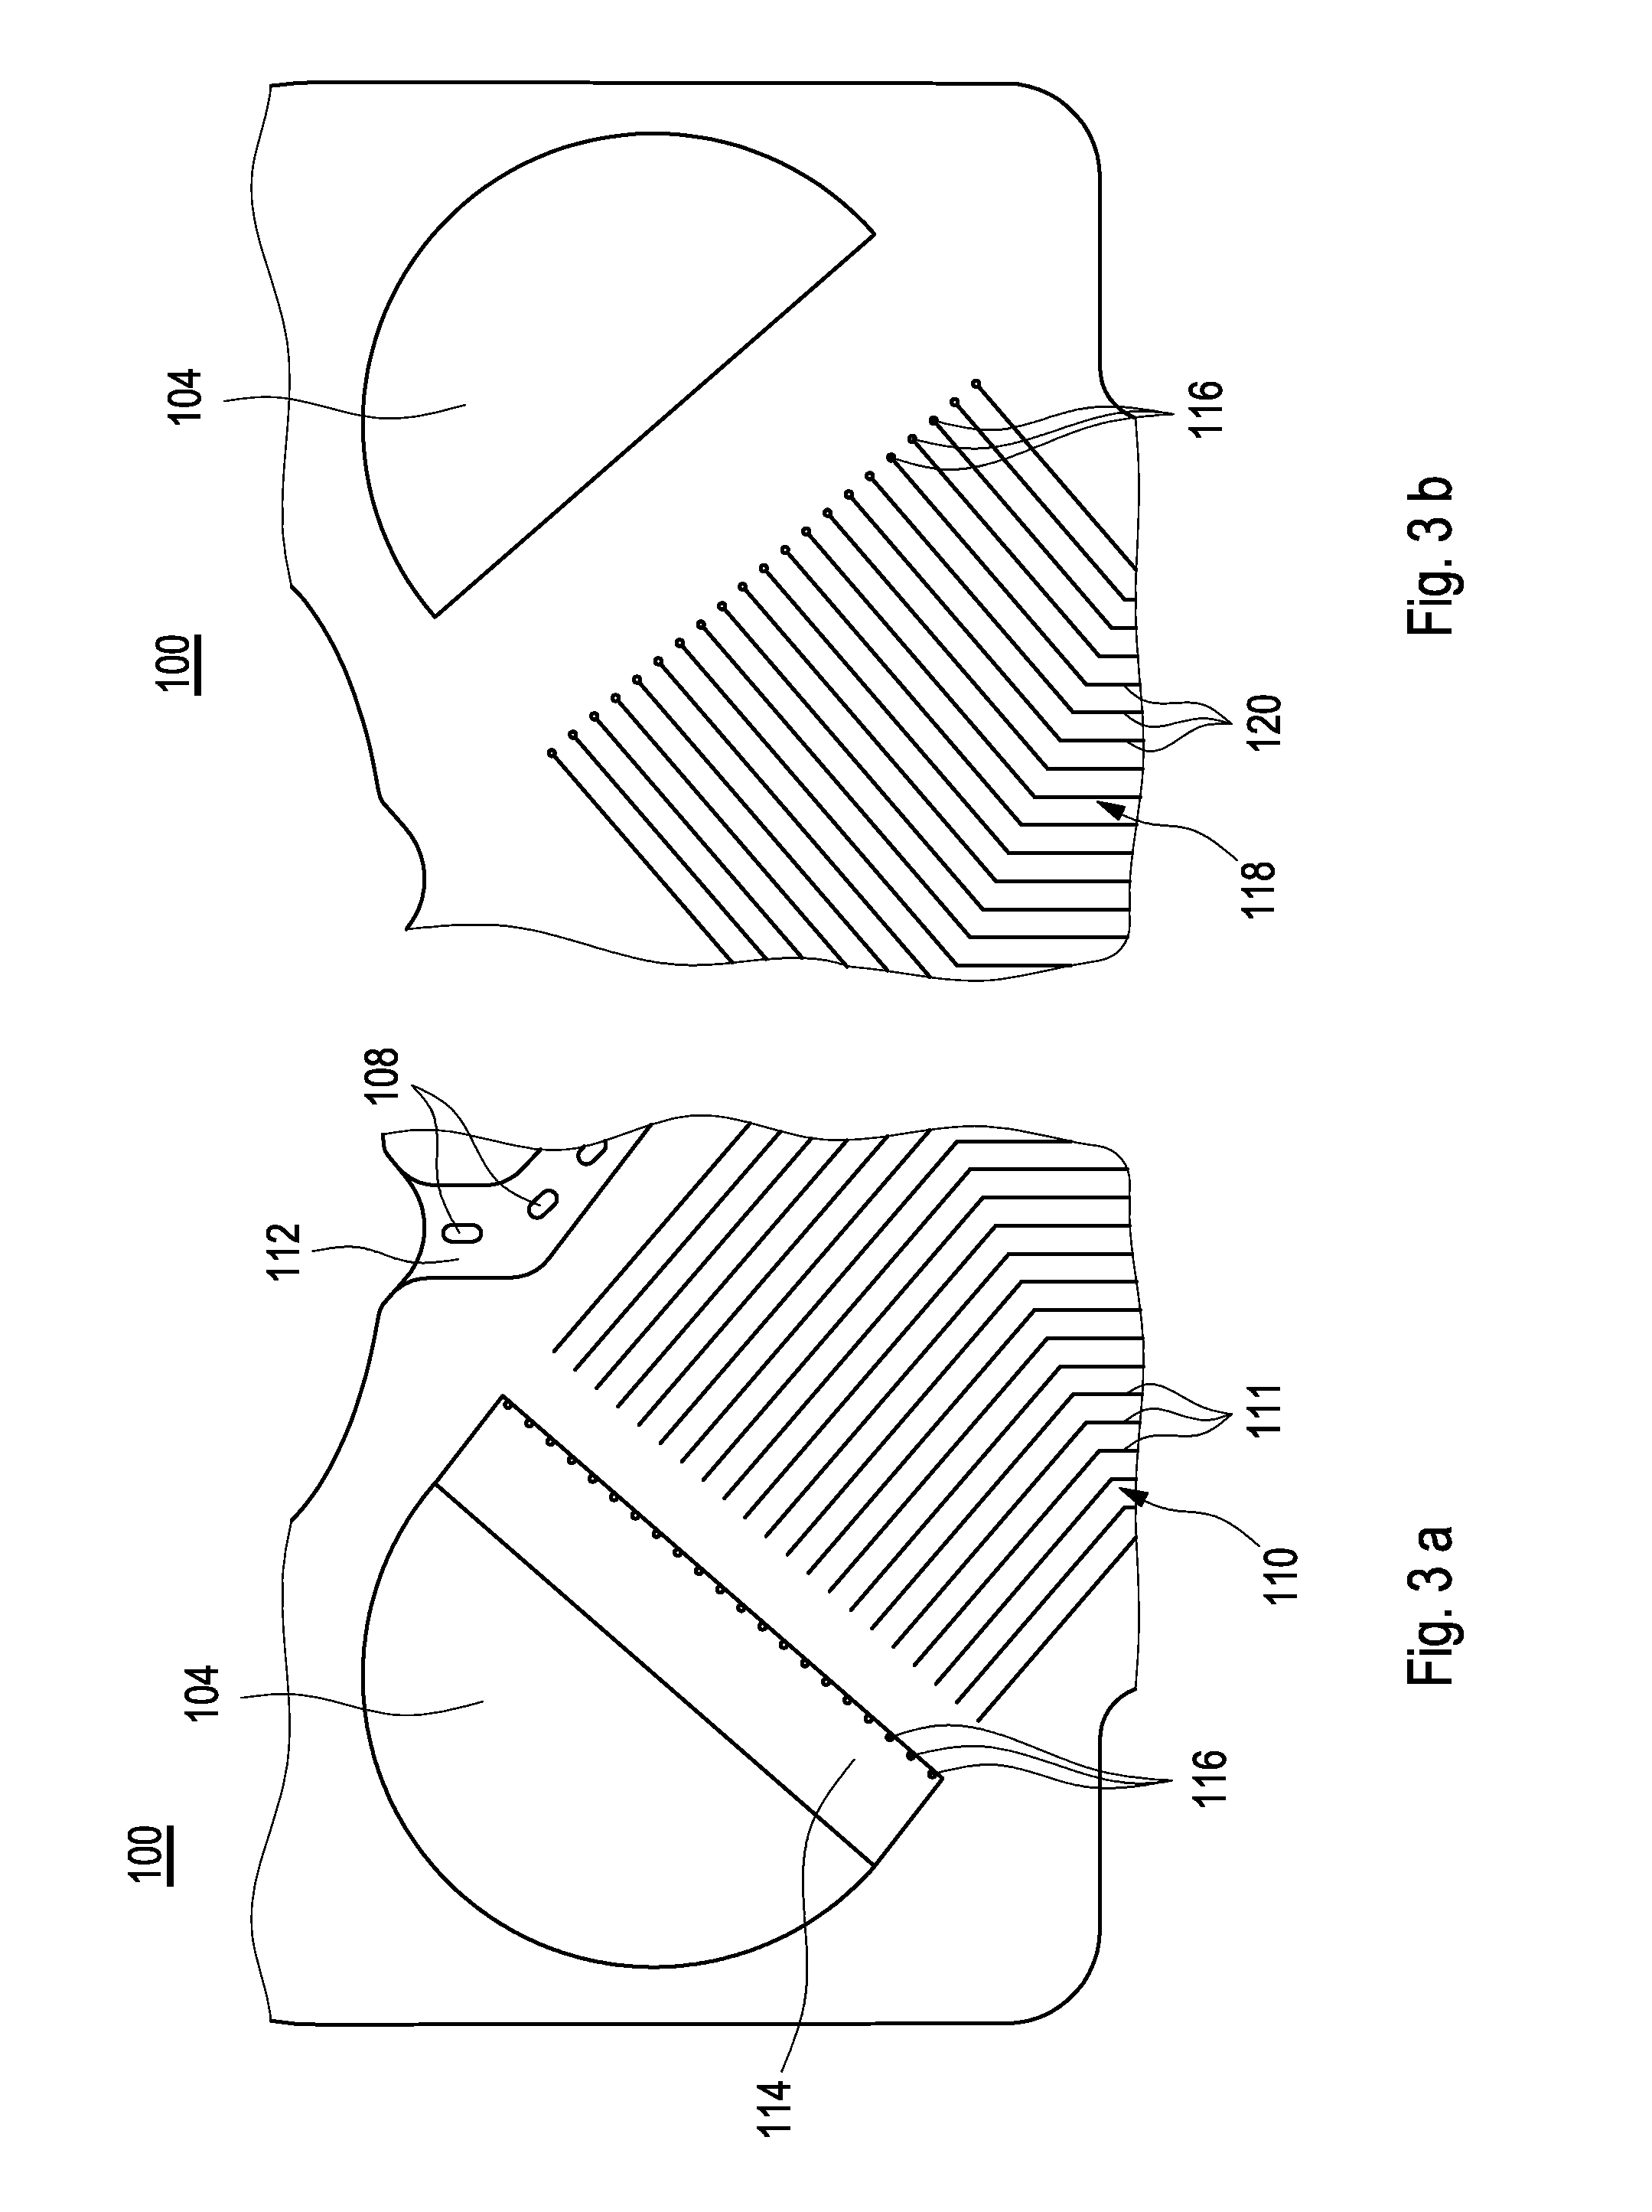 Flow field plate for a fuel cell